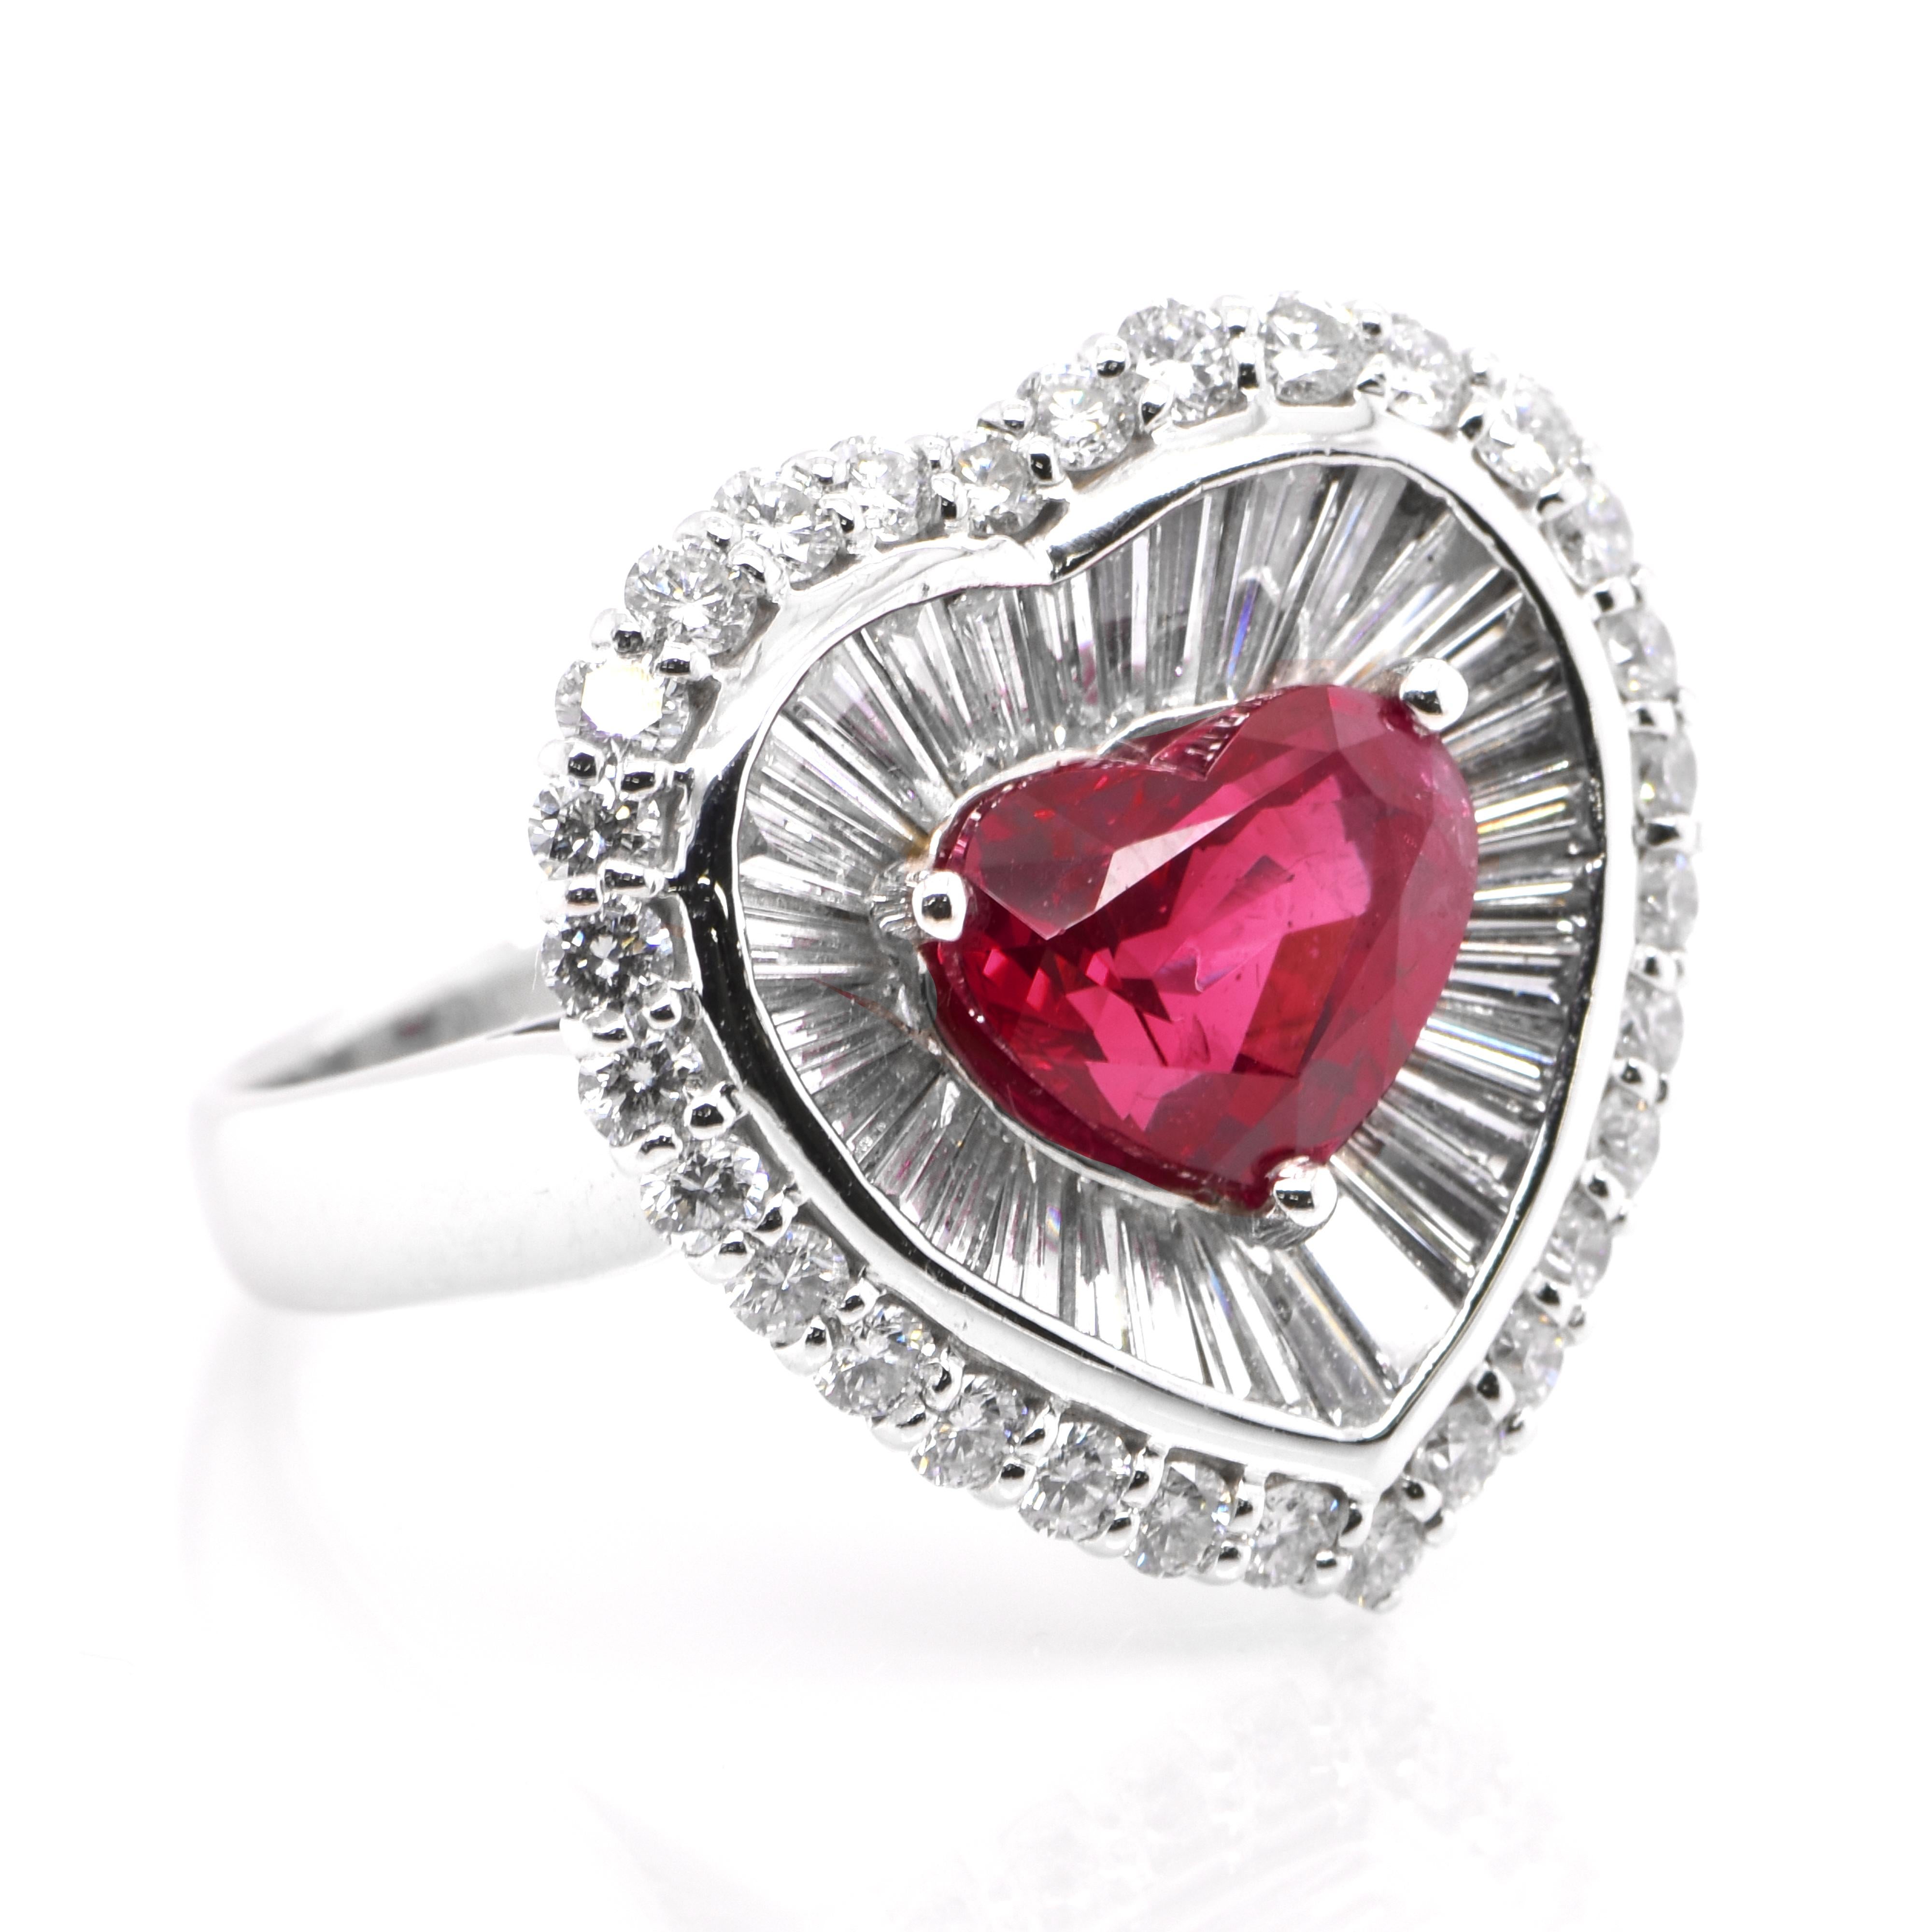 A beautiful Cocktail ring set in Platinum featuring a GIA Certified 3.02 Carat Natural Burmese Ruby and 2.21 Carats of Diamond Accents. Rubies are referred to as 